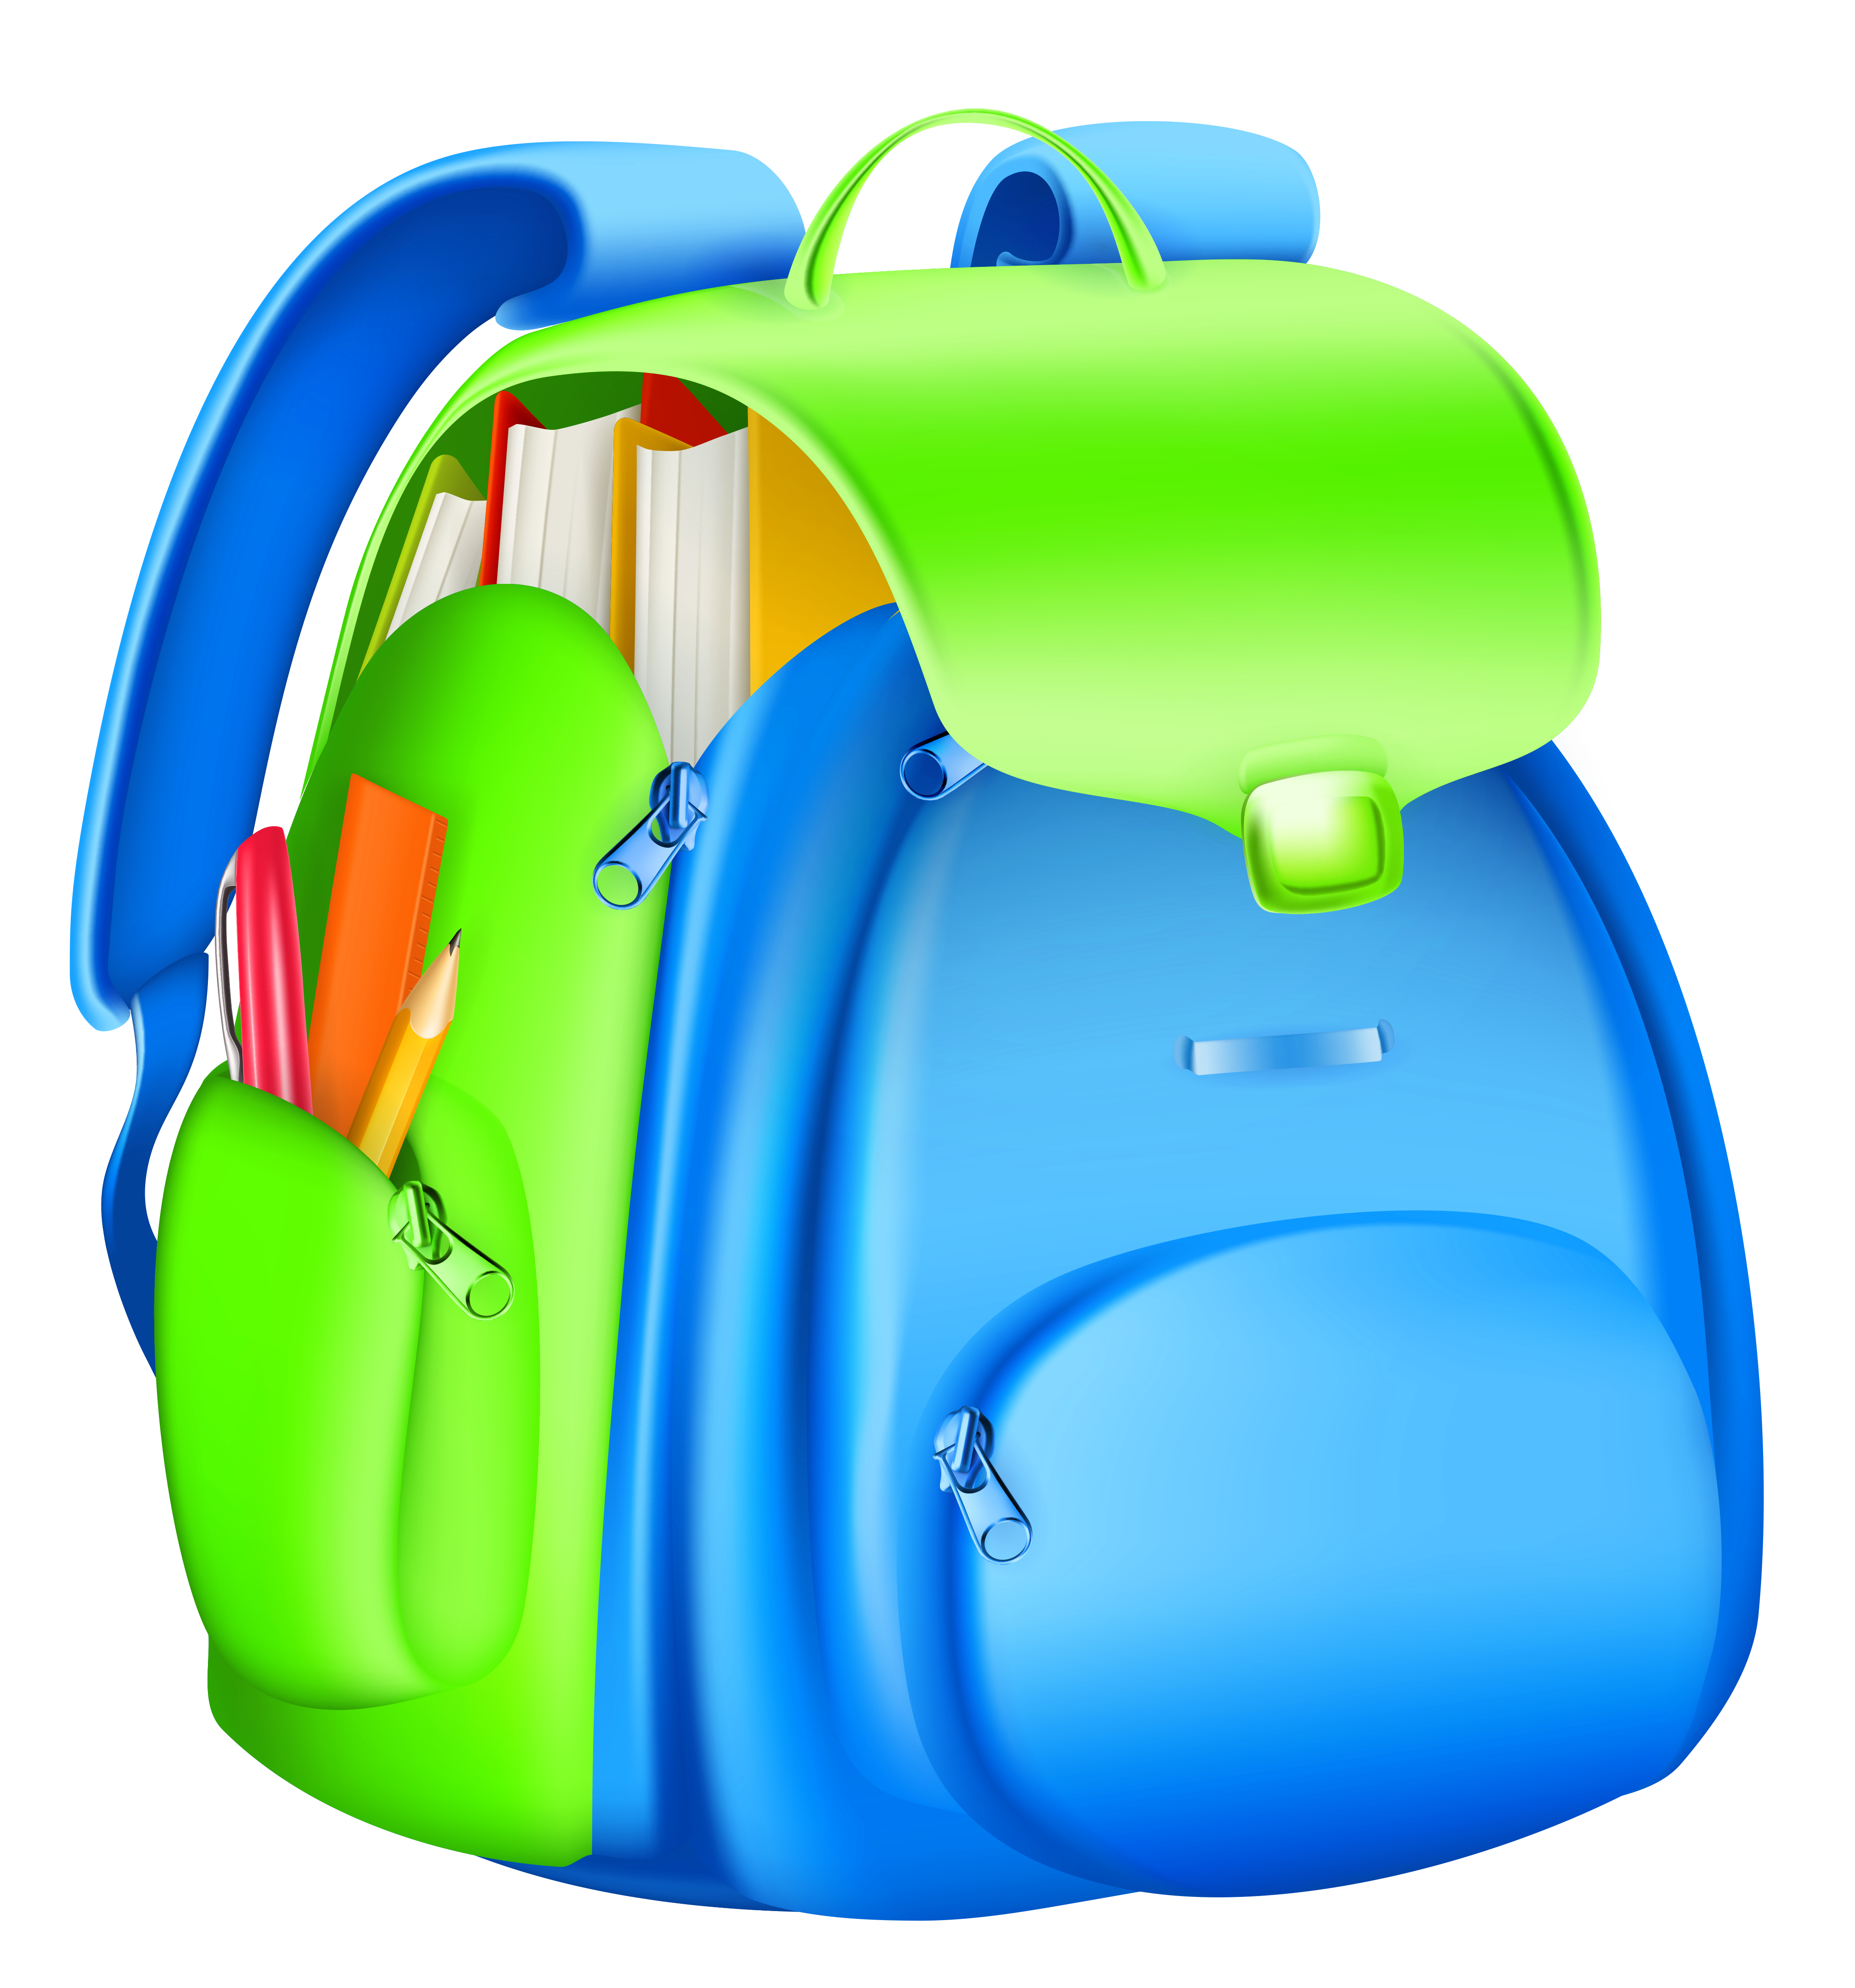 Rachbackpack Clip Art At Vector Clip Art Online Royalty | Images and ...